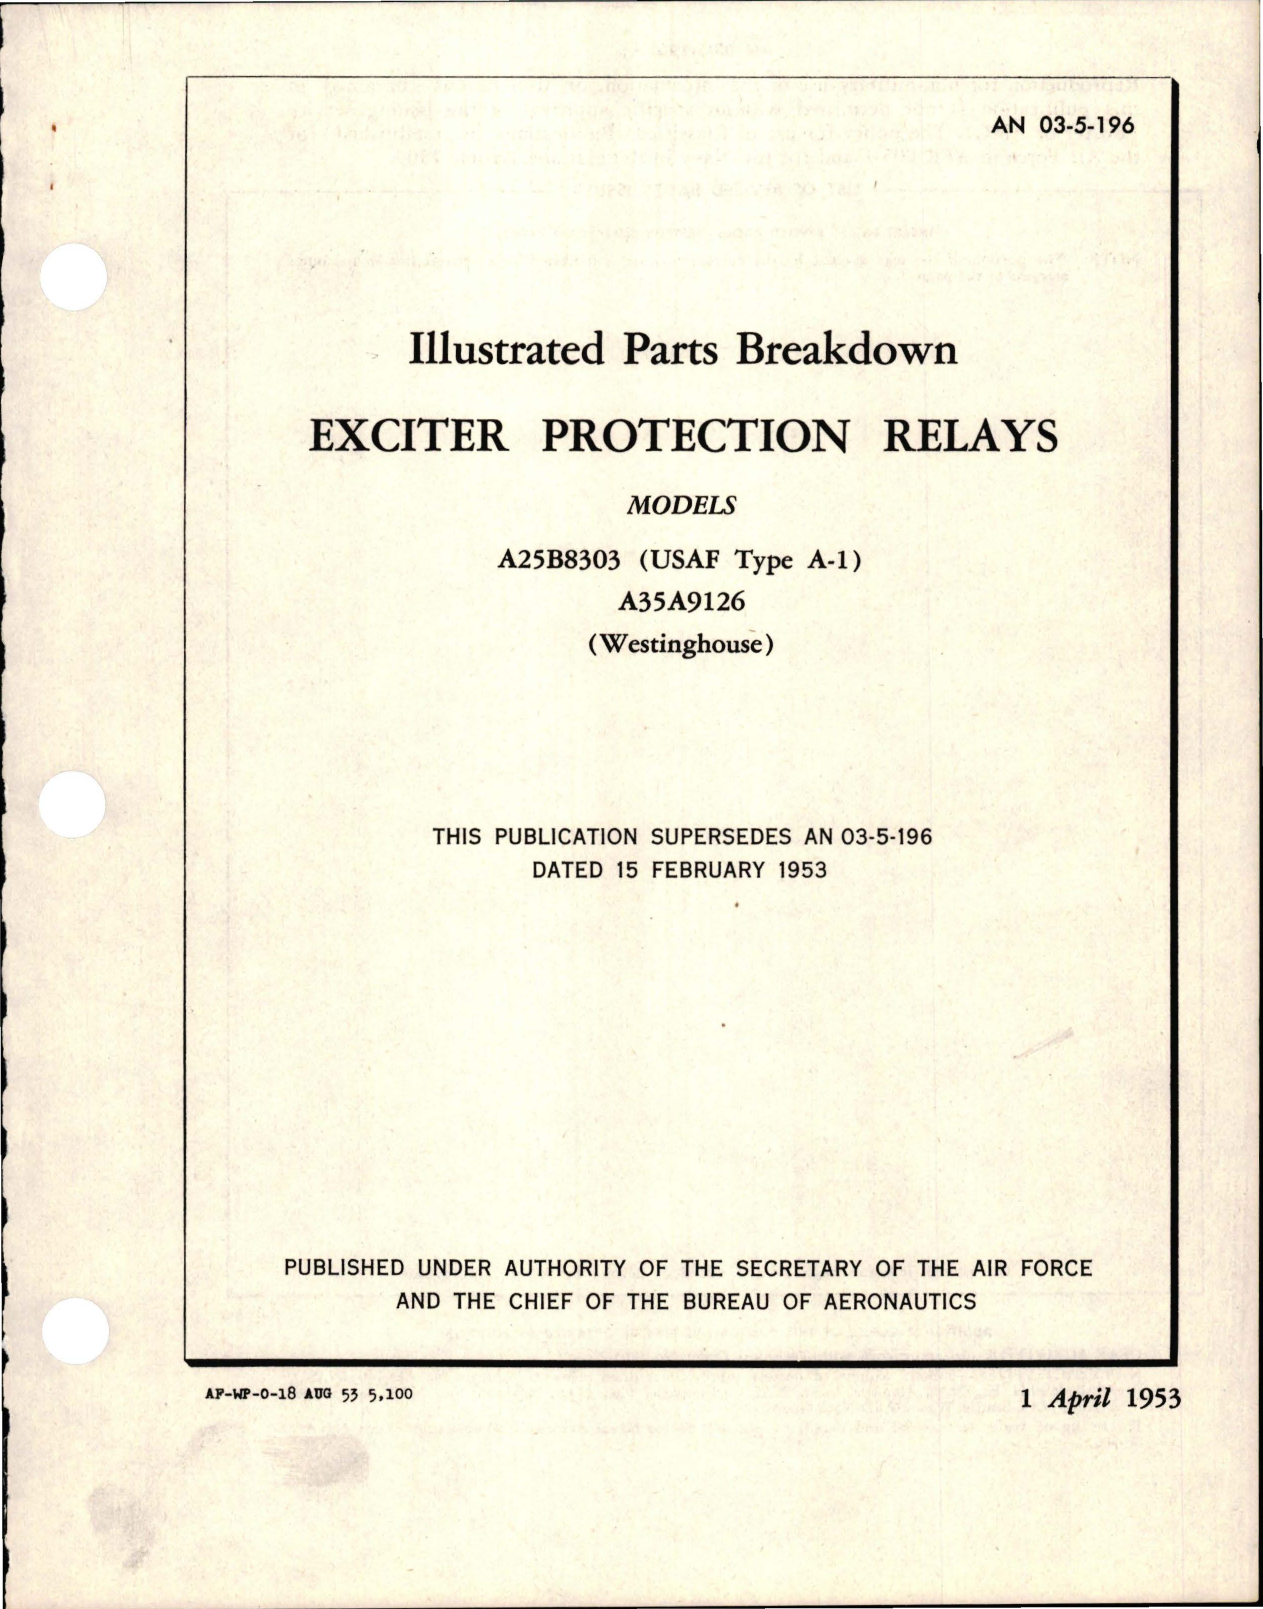 Sample page 1 from AirCorps Library document: Illustrated Parts Breakdown for Exciter Protection Relays - Models A25B8303 (USAF Type A-1) and A35A9126